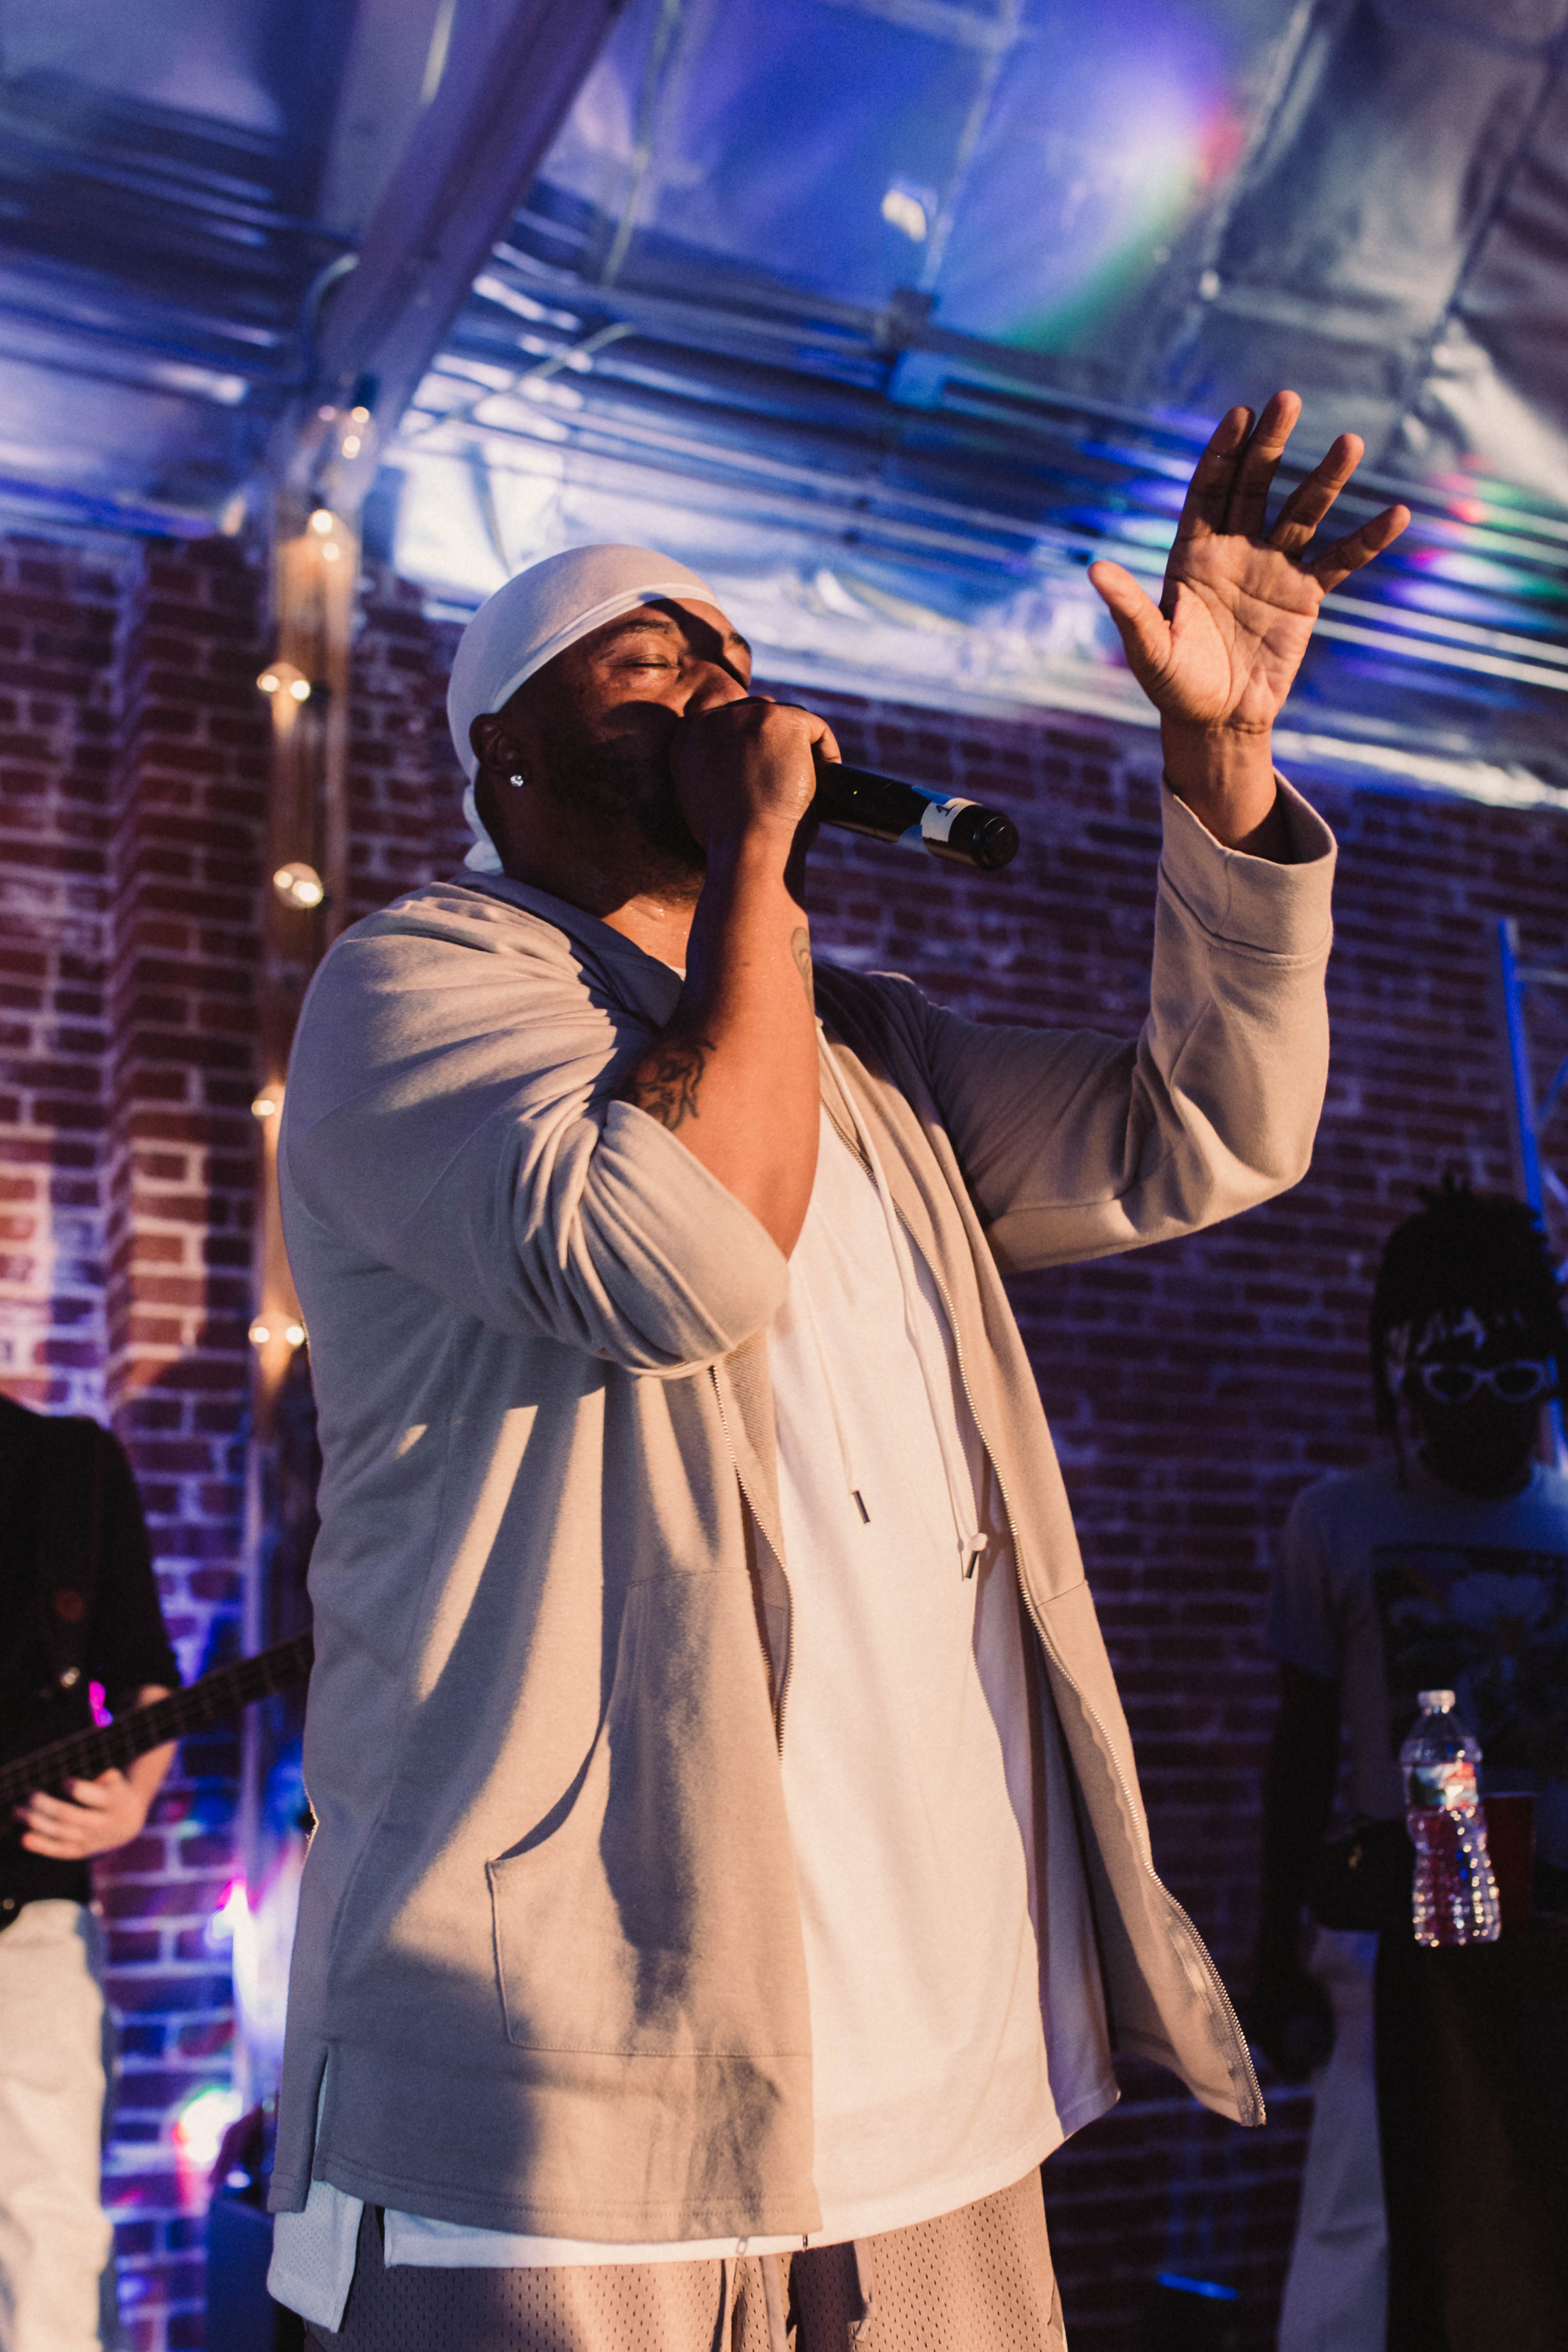 Malik Yusef performs at his album release on October 1, 2018